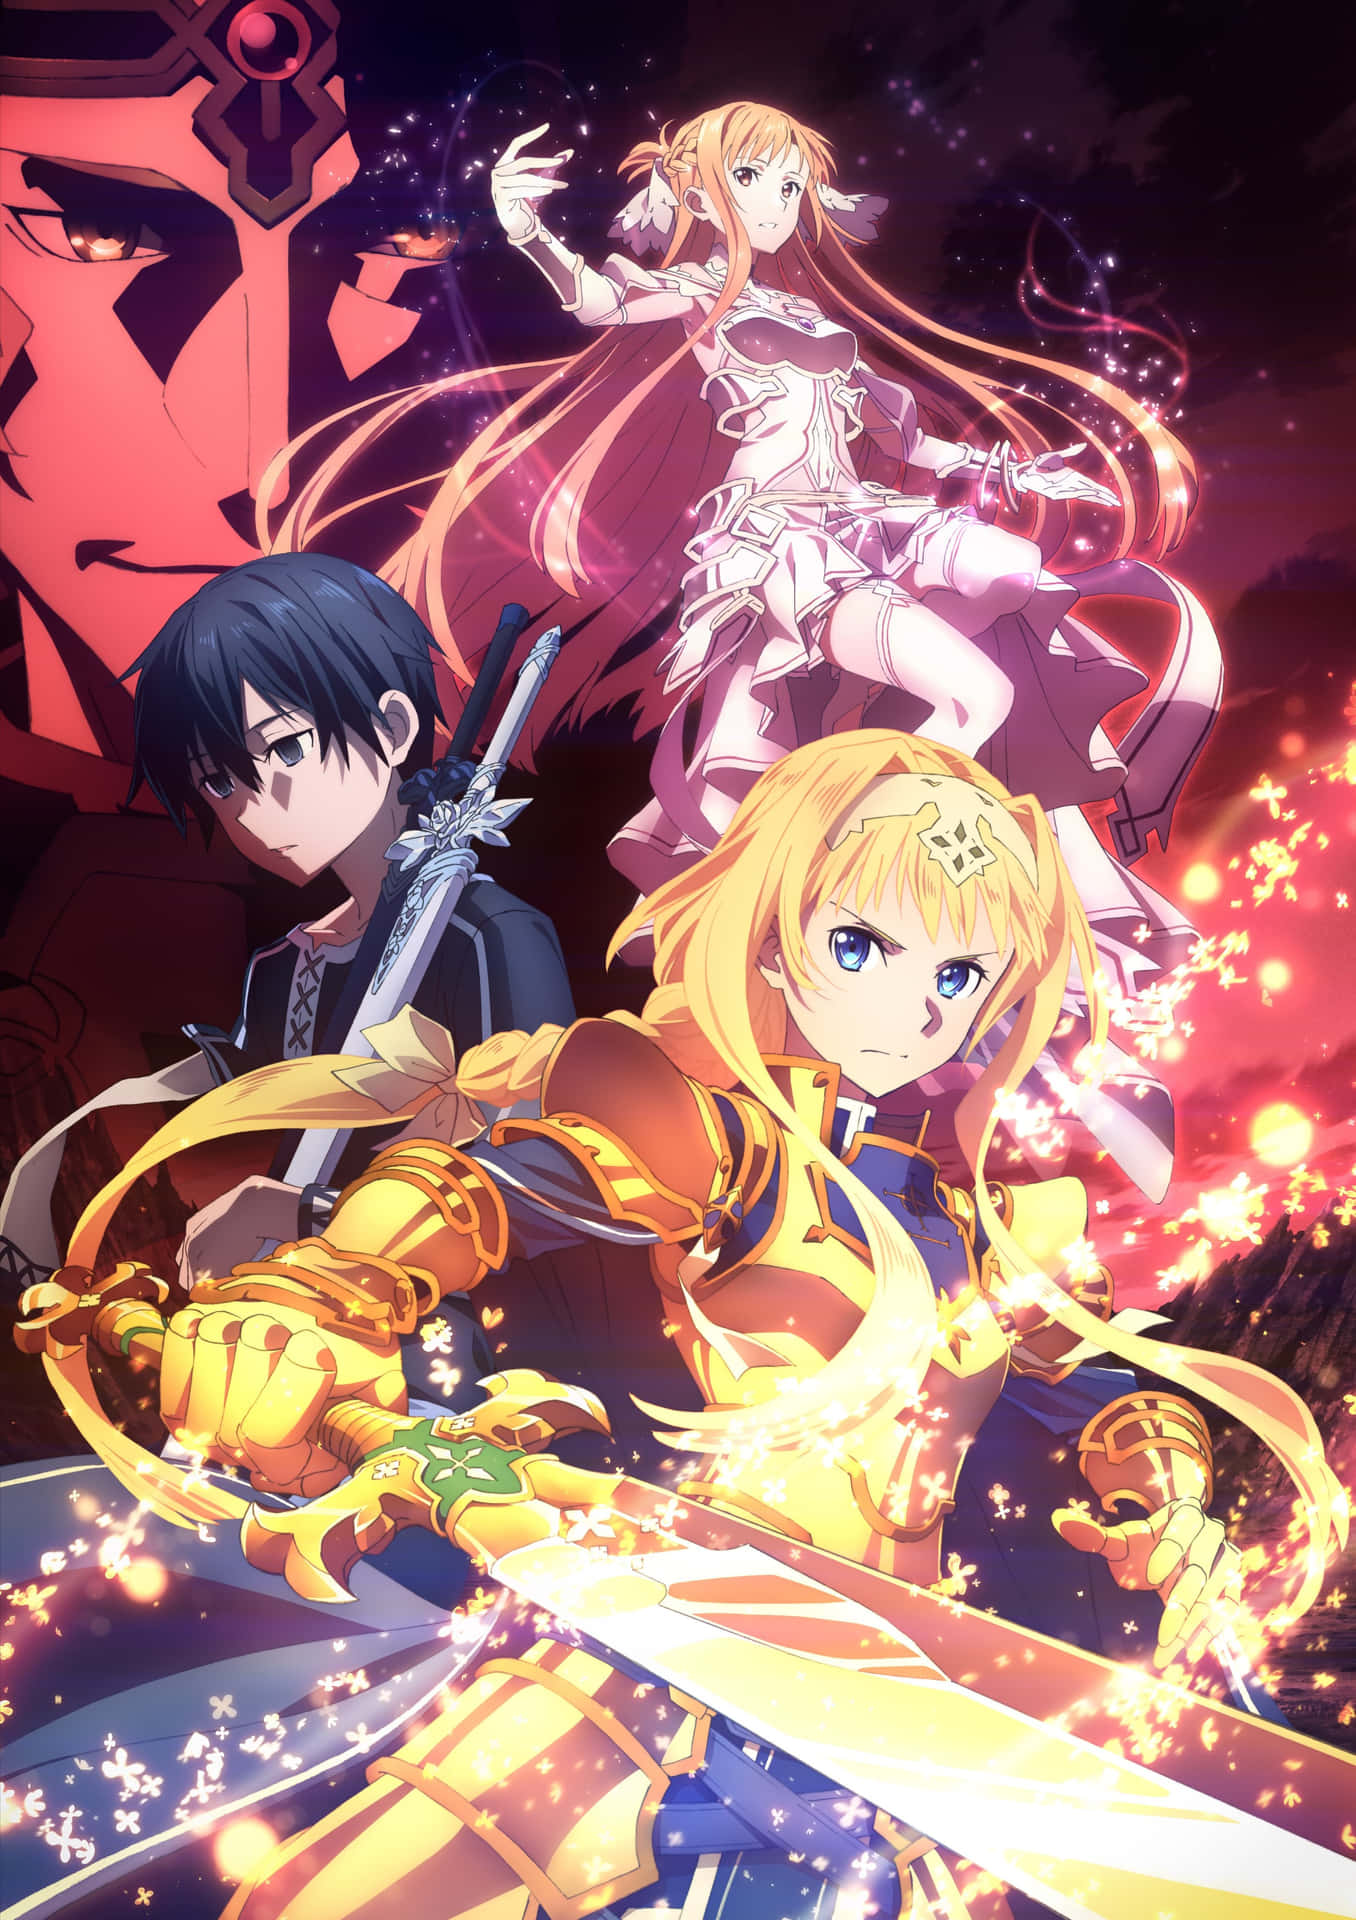 Taking the leap of faith with Kirito and Asuna